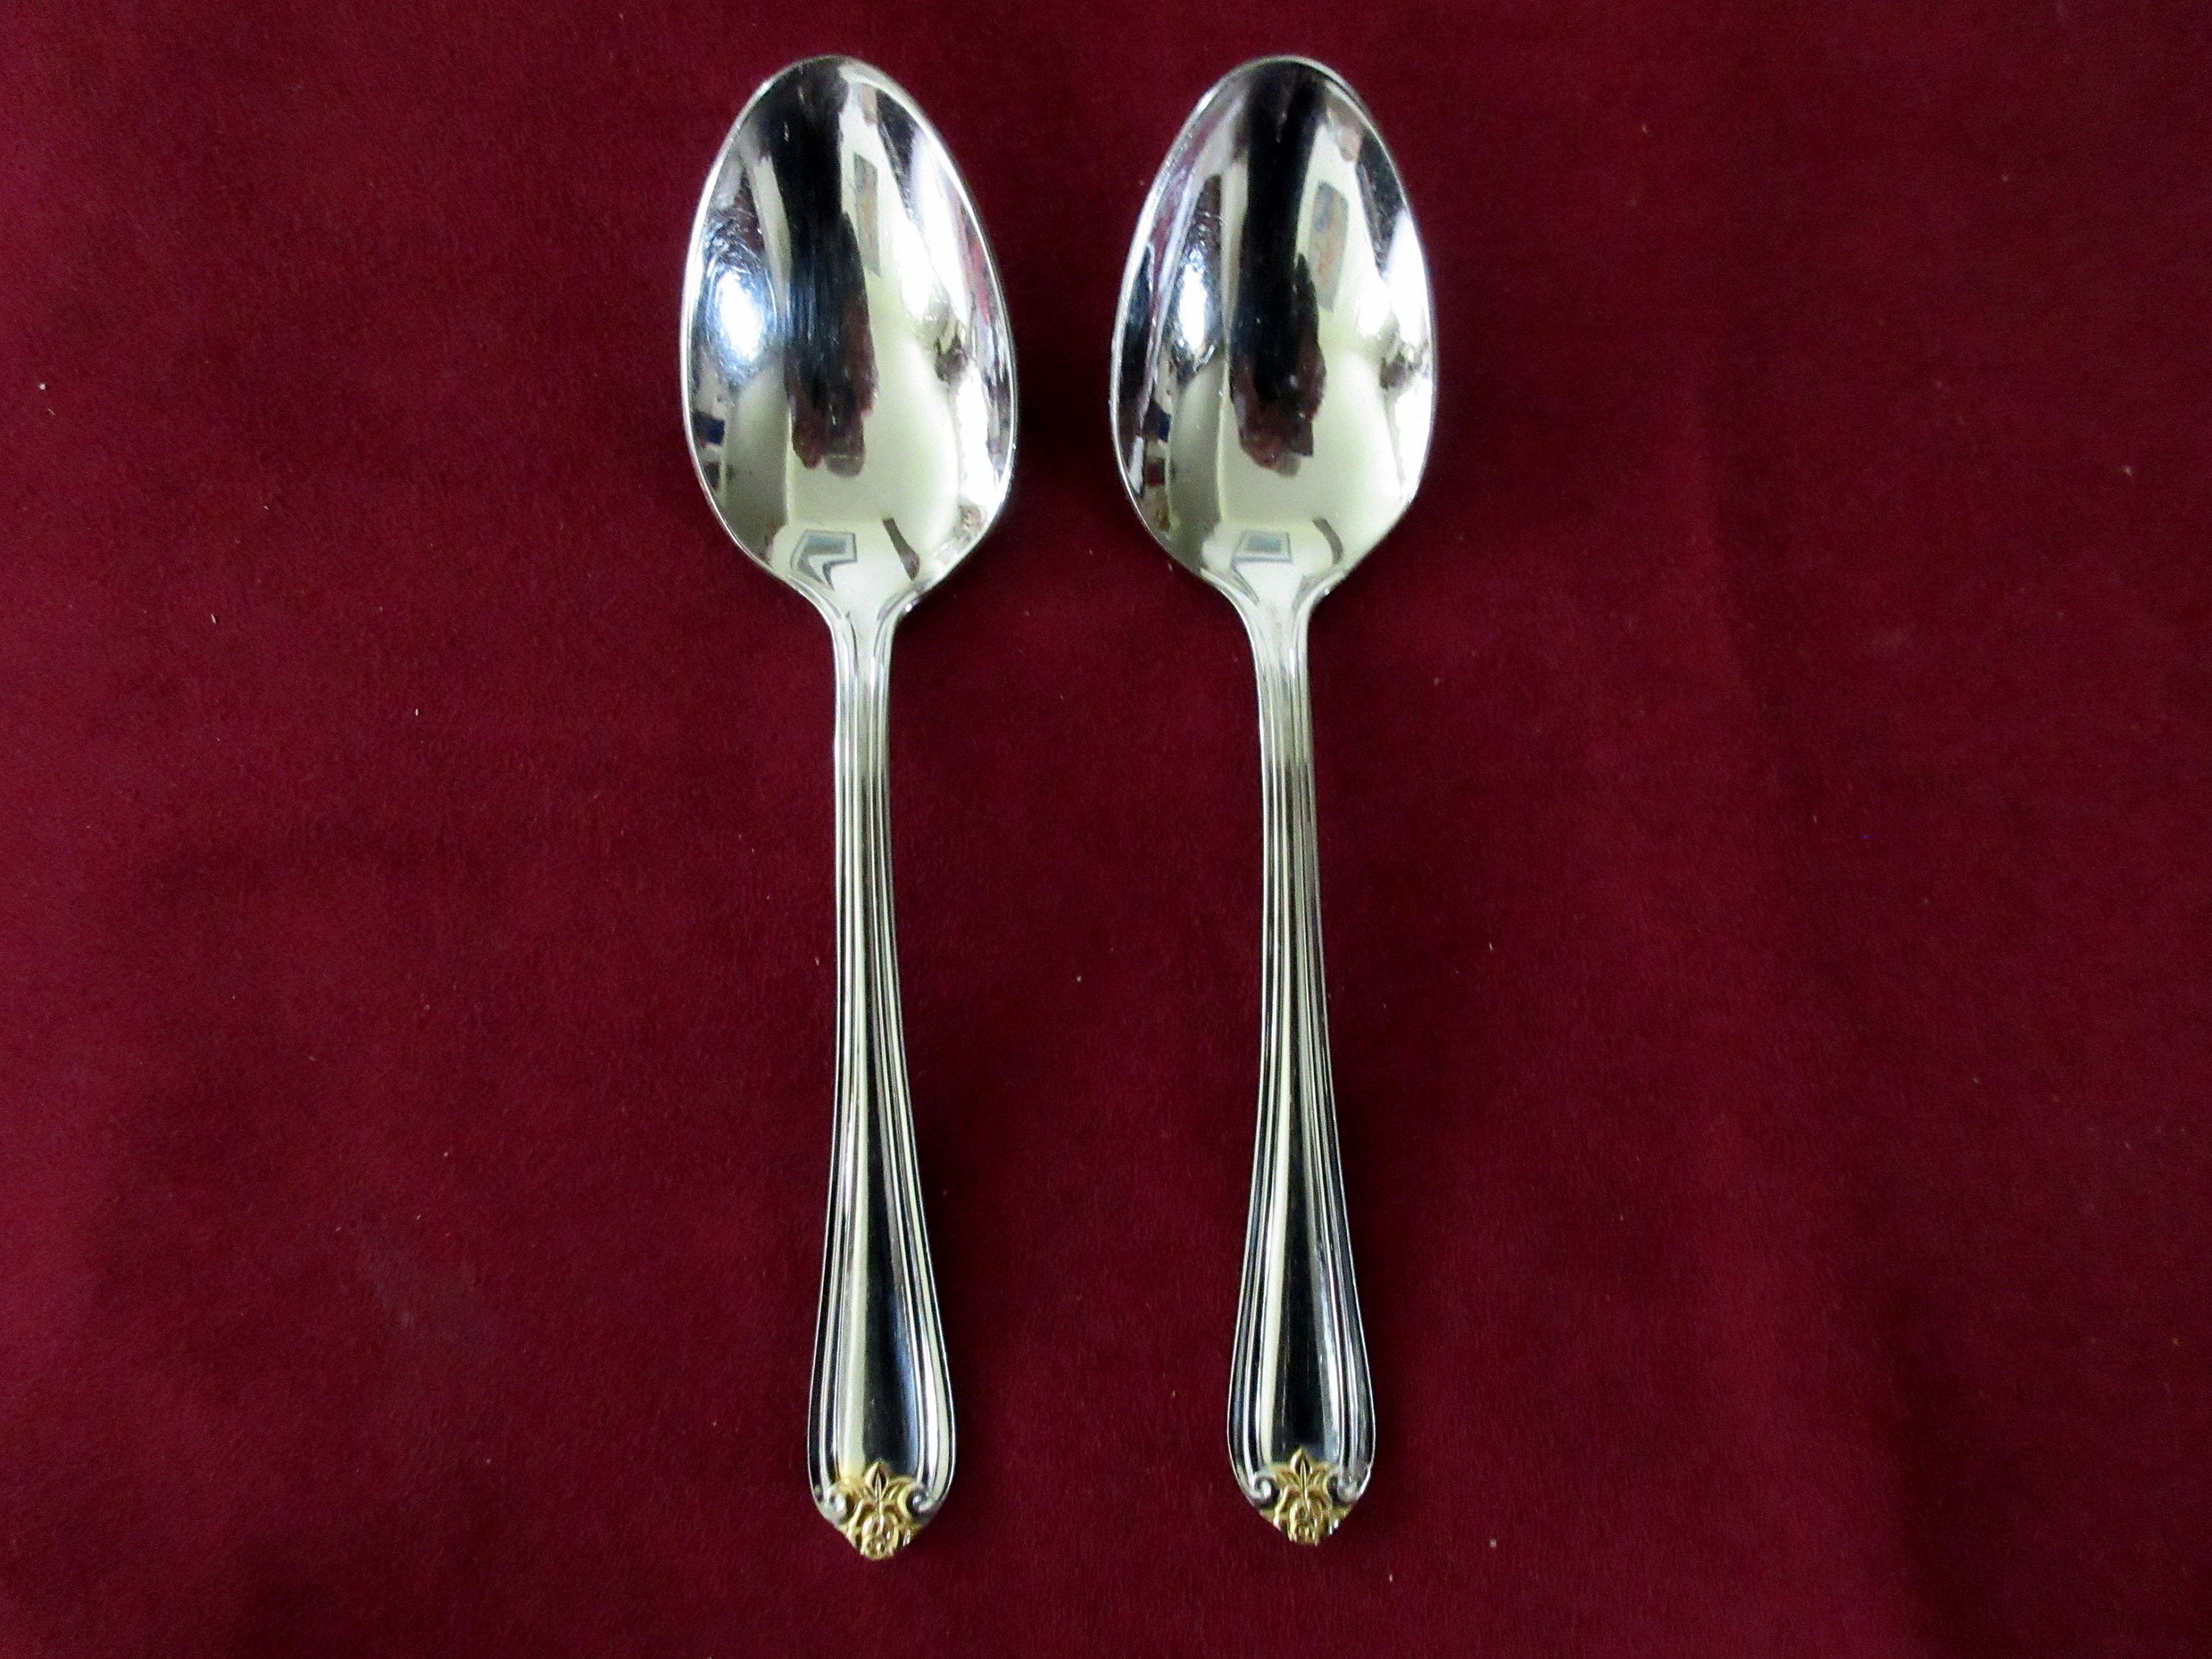 6 Teaspoons AMERICAN CLASSIC Reed & Barton Stainless Steel Flatware Glossy 